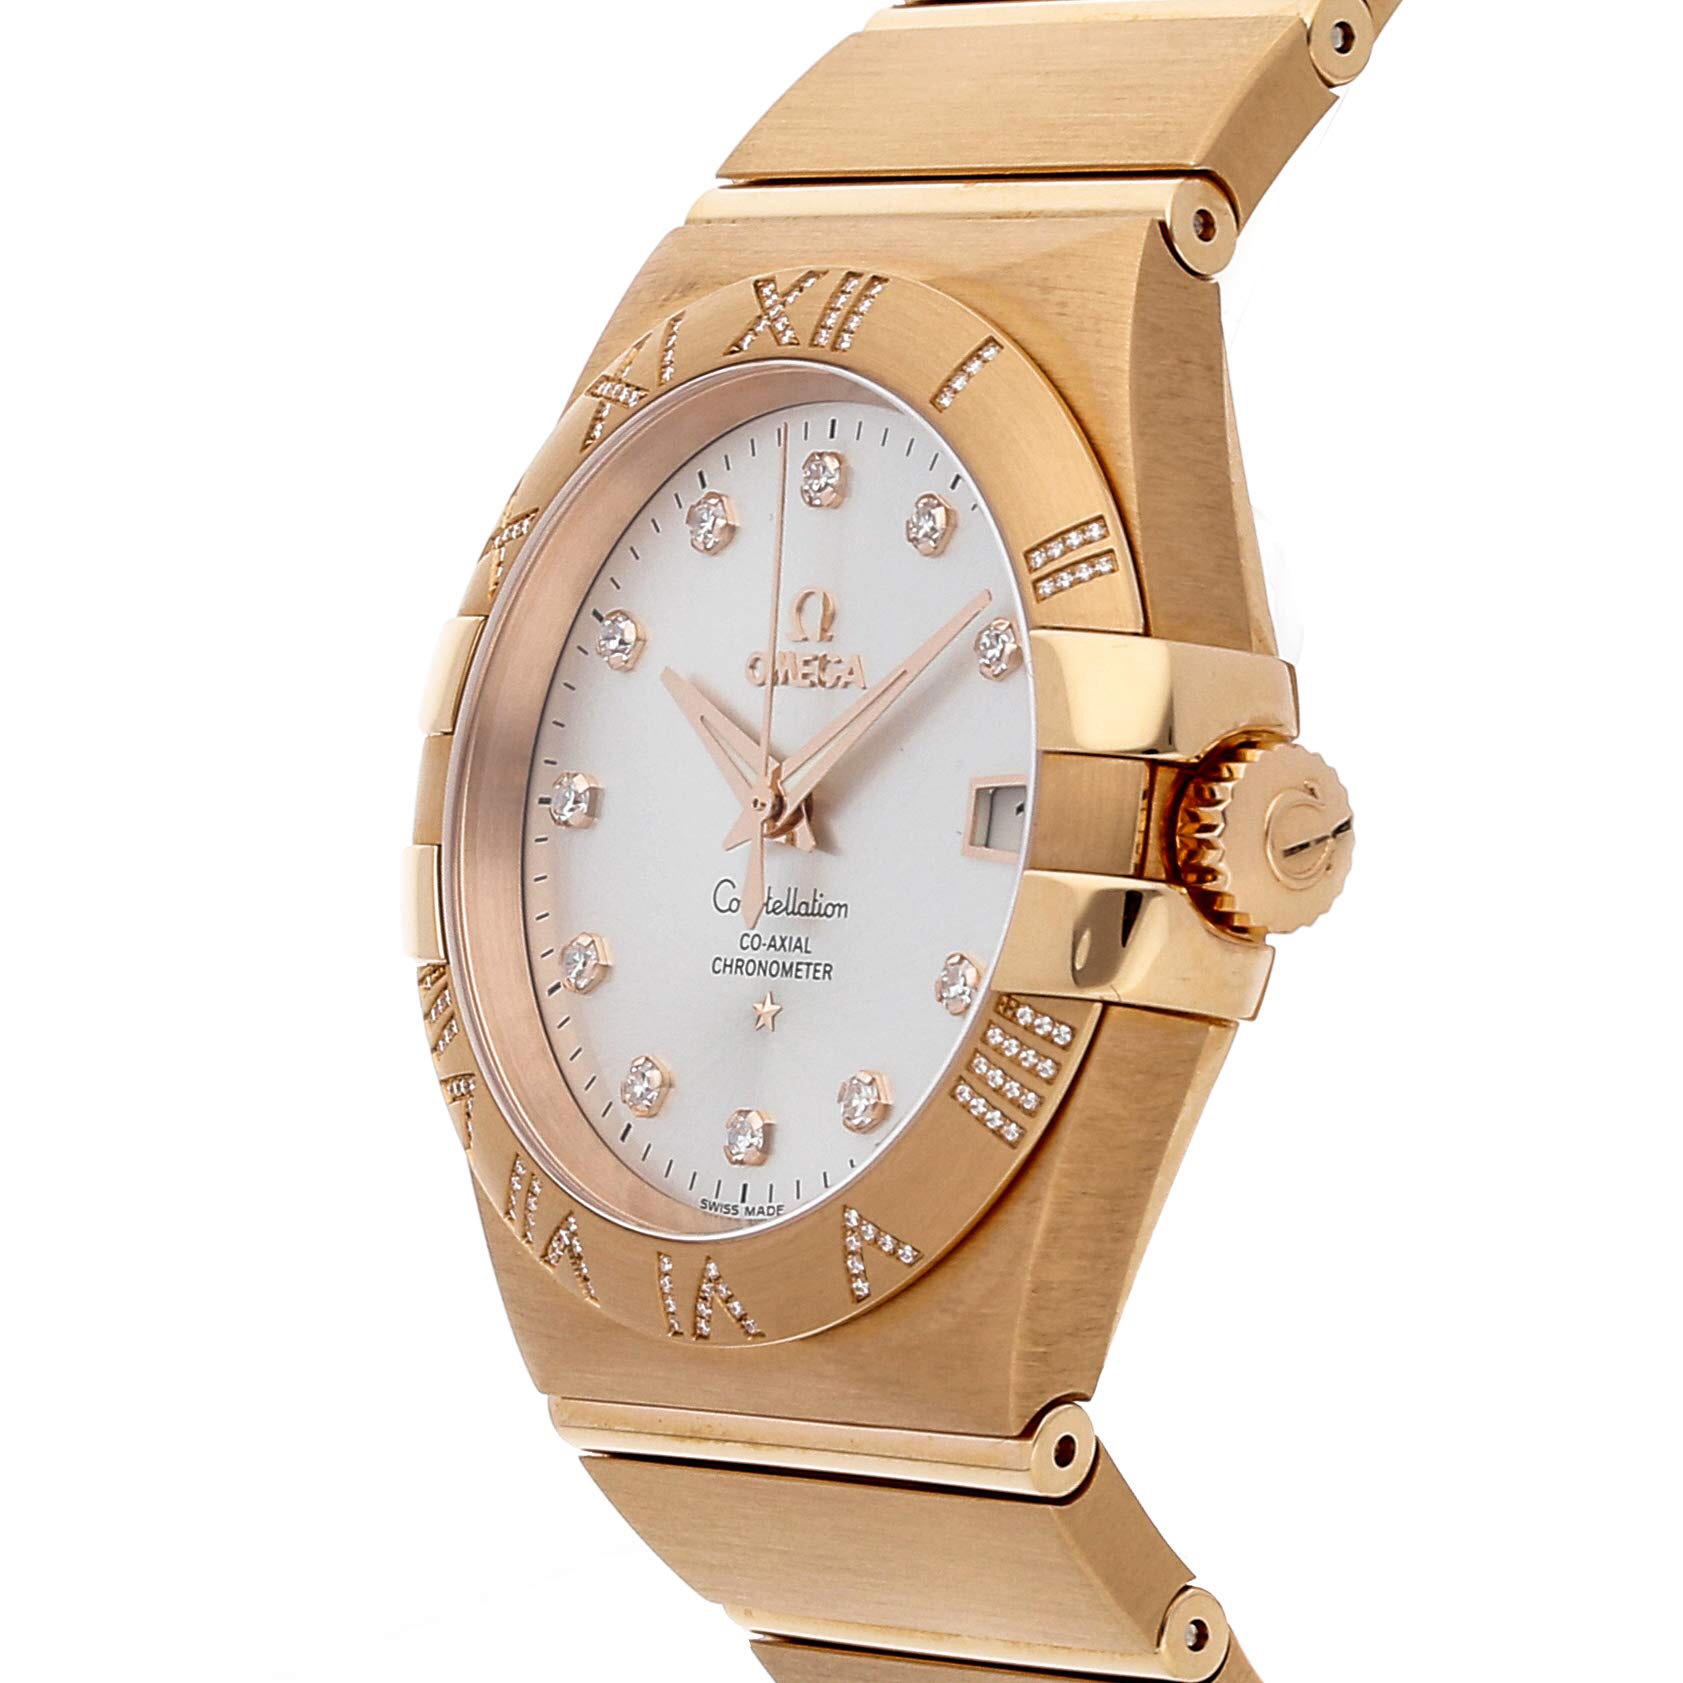 Omega Constellation Co-Axial 123.55.35.20.52.003 12355352052003